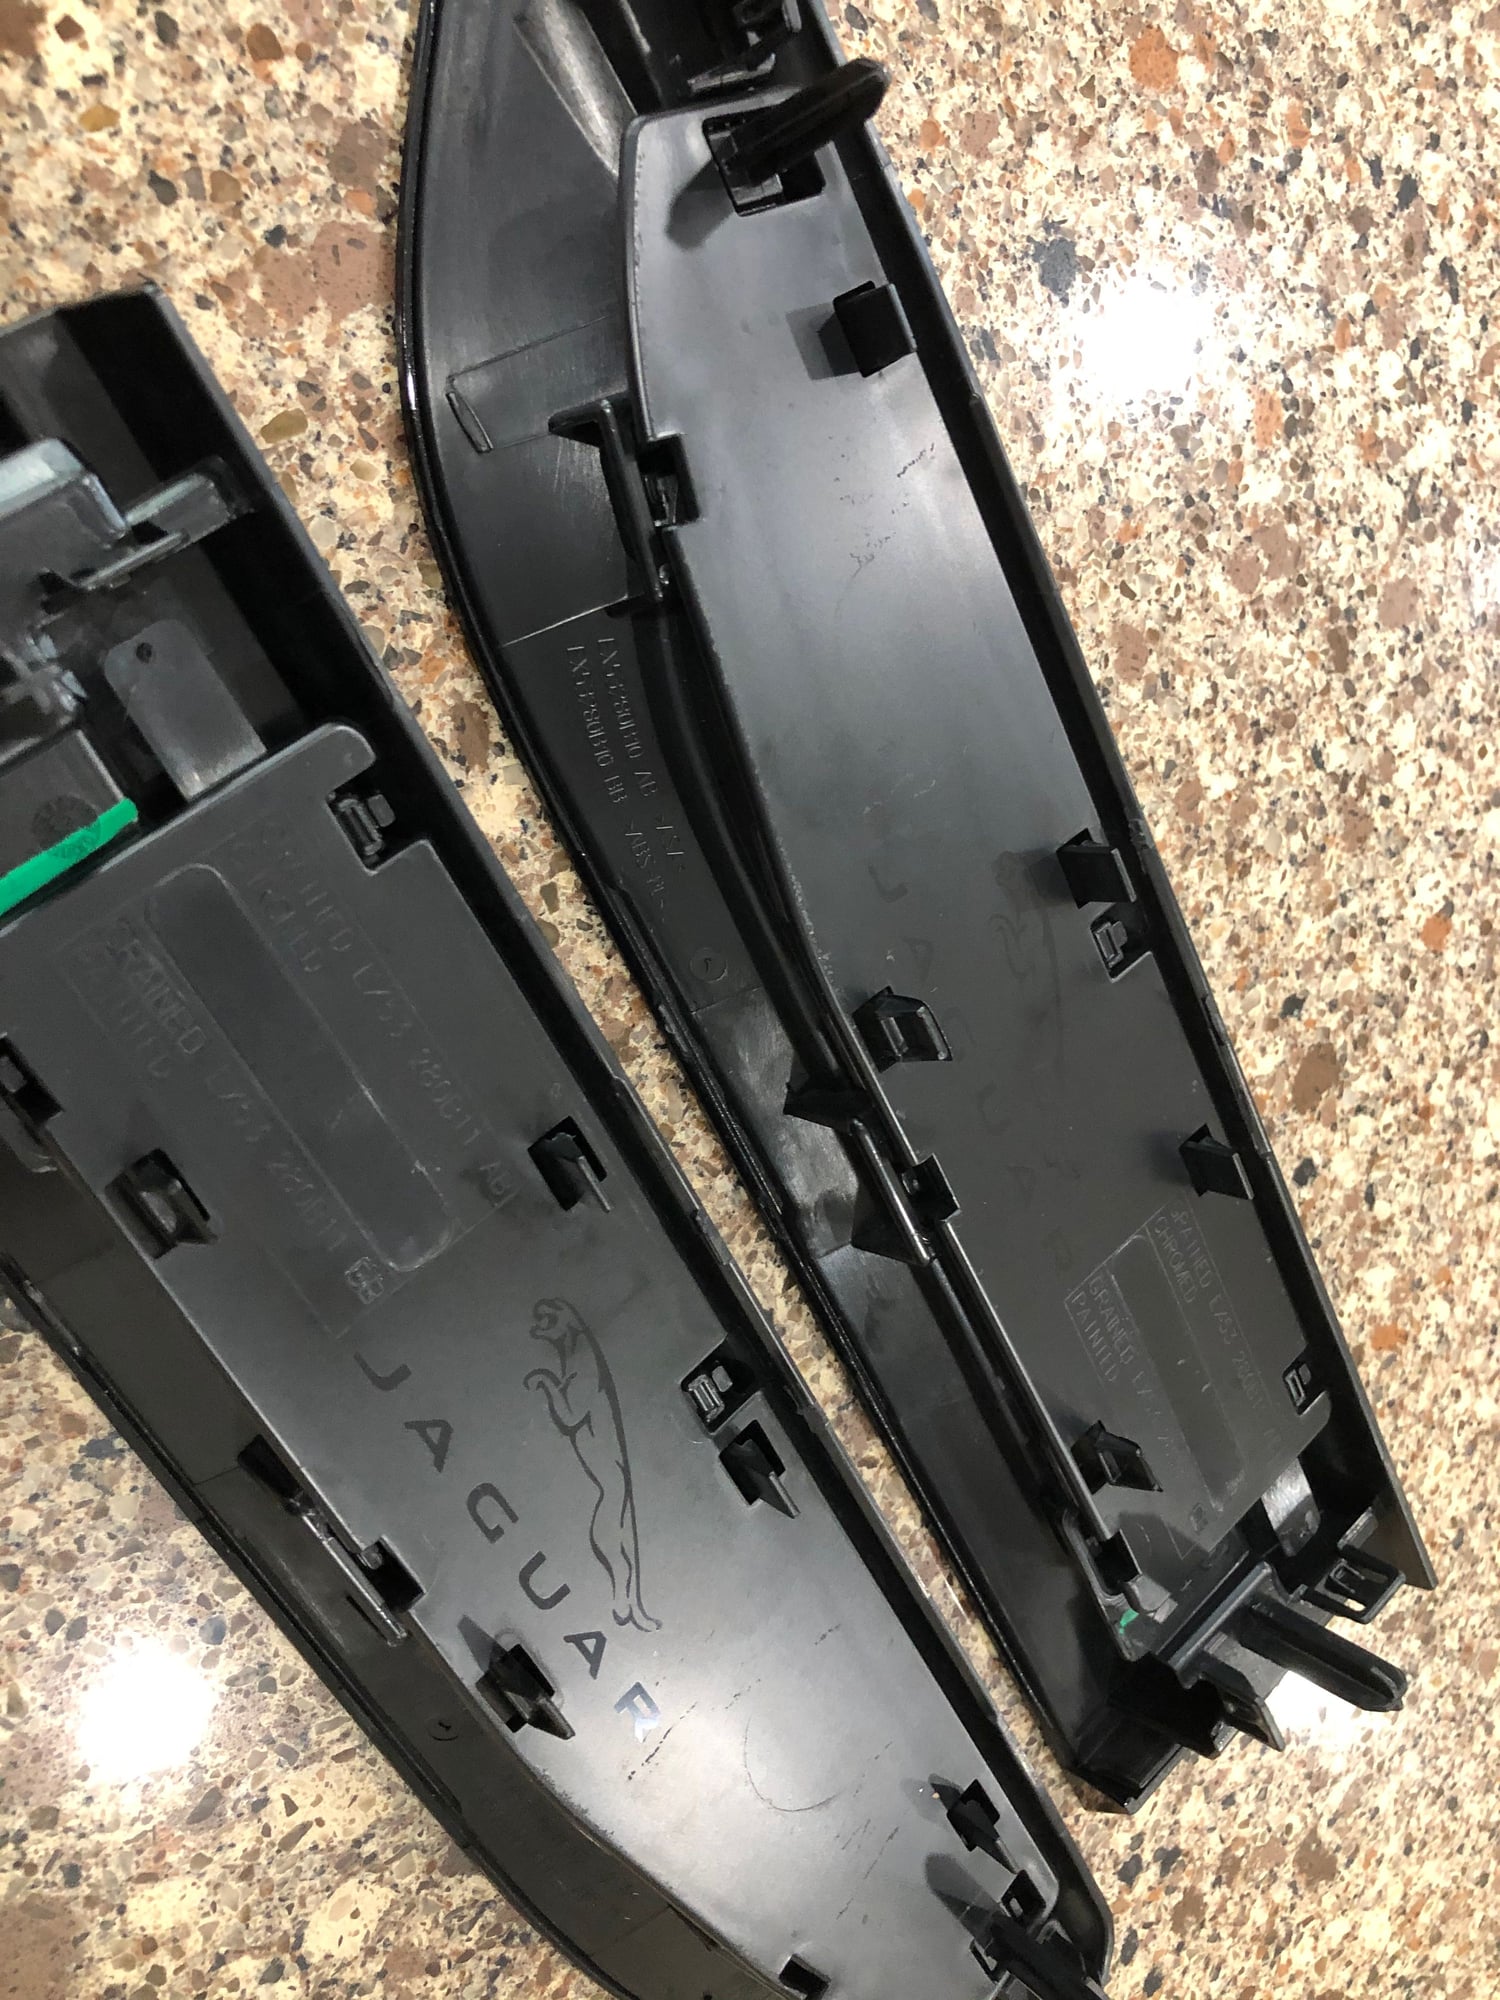 Accessories - F-type Gloss Black Power Vents Complete set - 1 pair Free Shipping - Used - 2013 to 2018 Jaguar F-Type - Fishers, IN 46037, United States